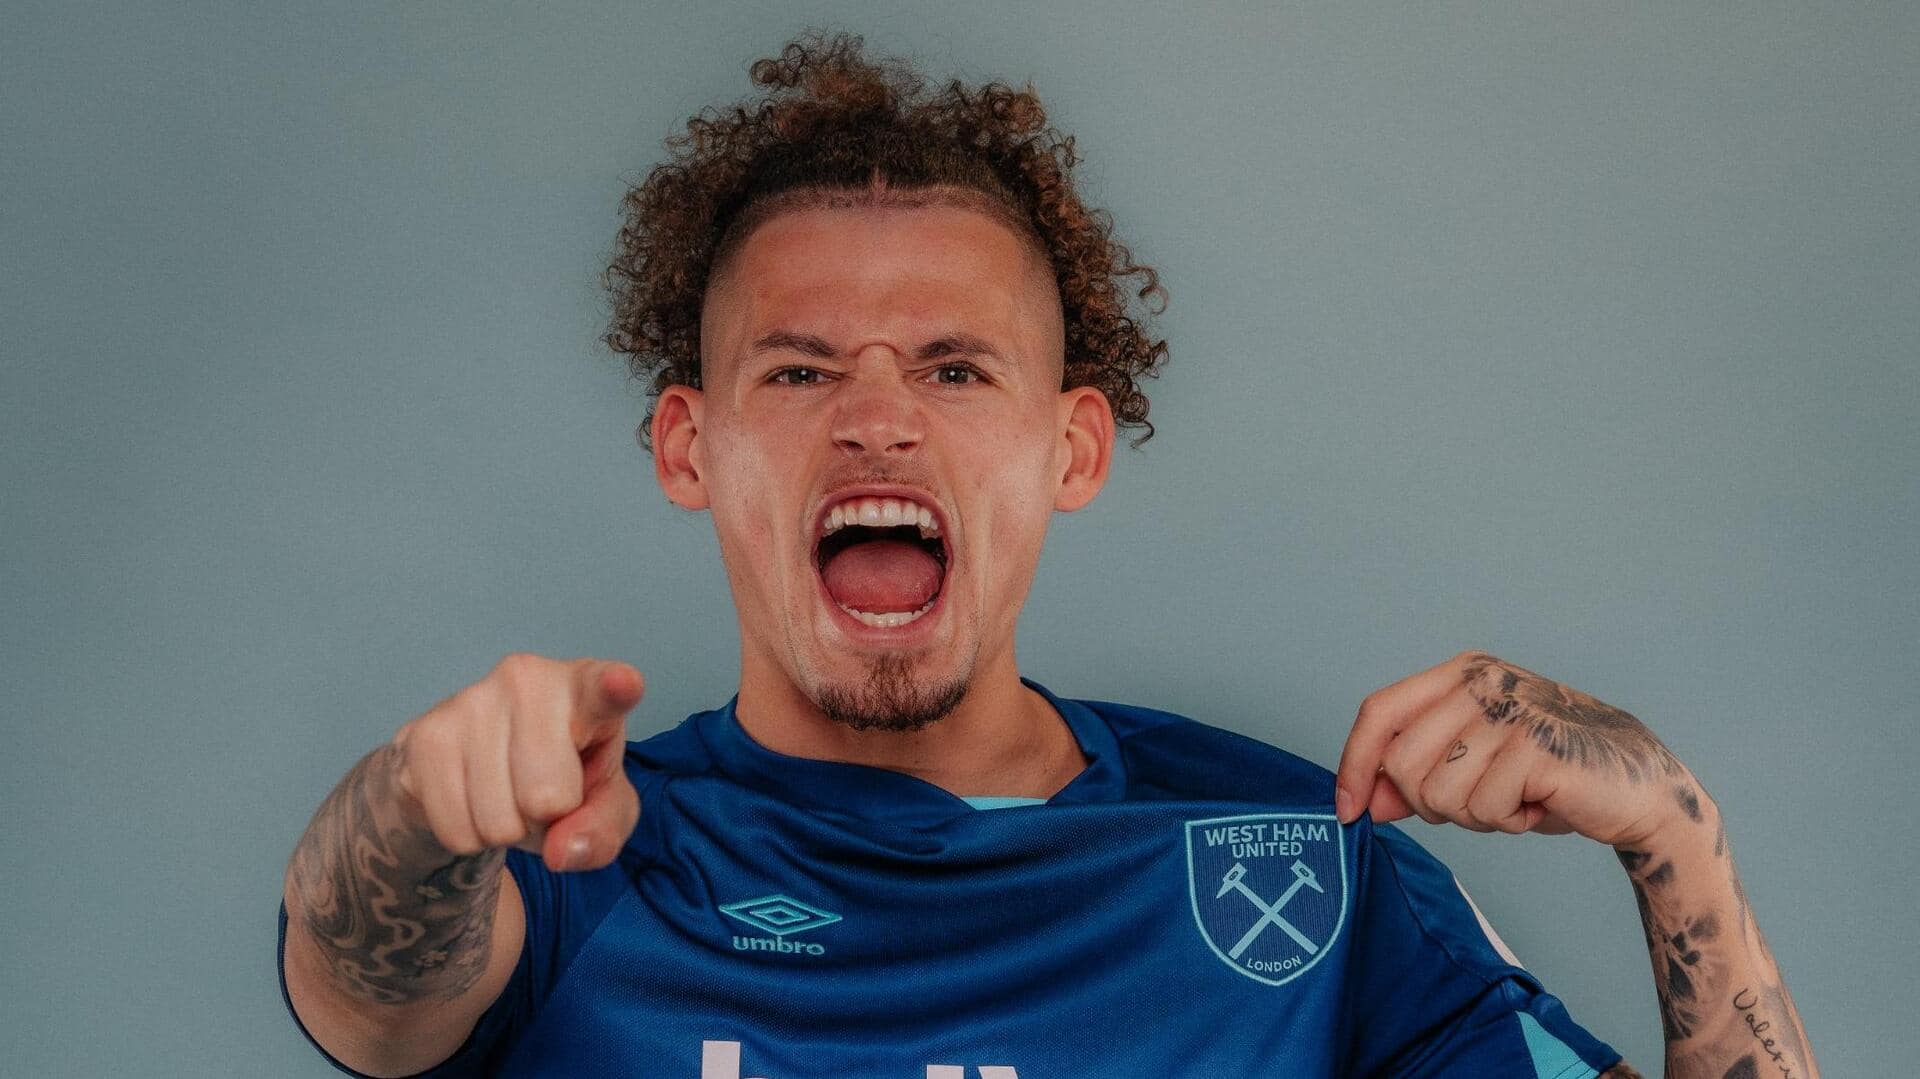 West Ham sign Kalvin Phillips on loan: Decoding his stats